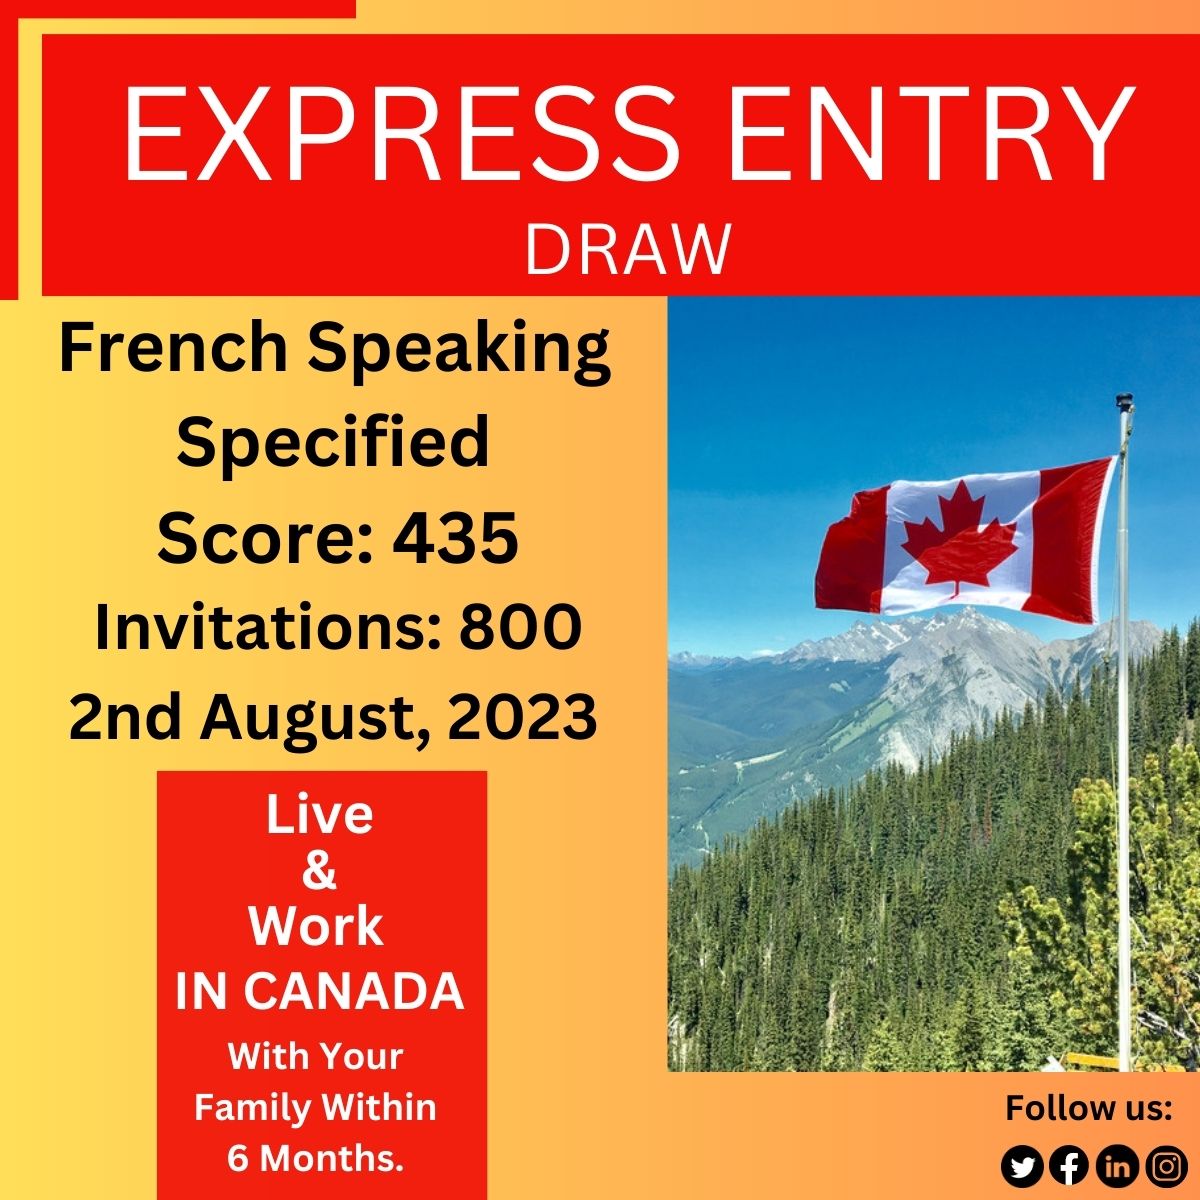 IRCC Conducts New Express Entry Draw, Invites 800 Candidates